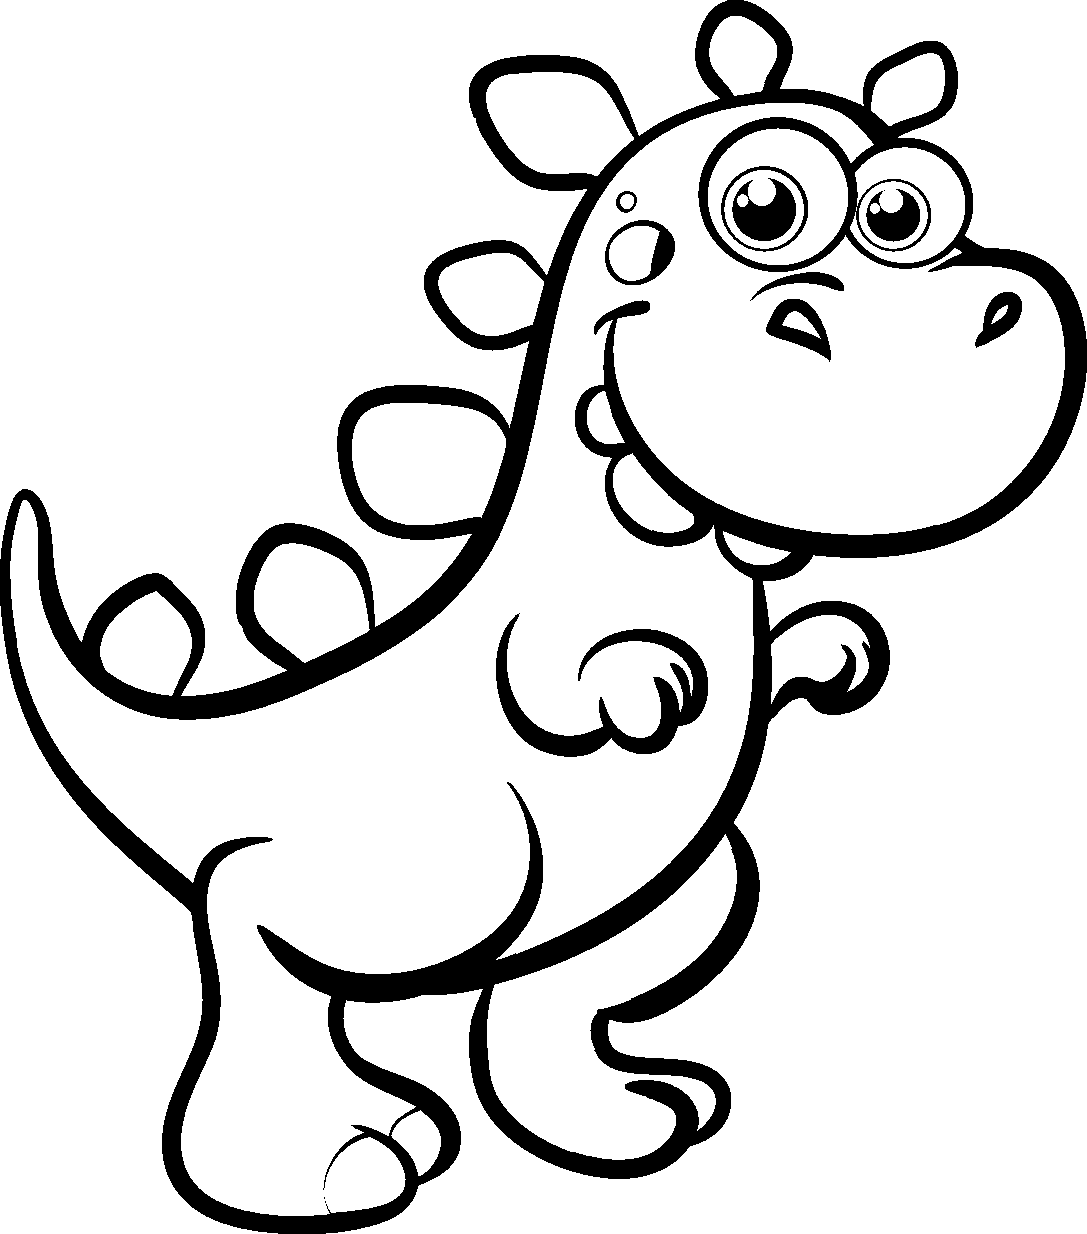 Dinosaur Coloring Pages For Toddlers - Coloring Home